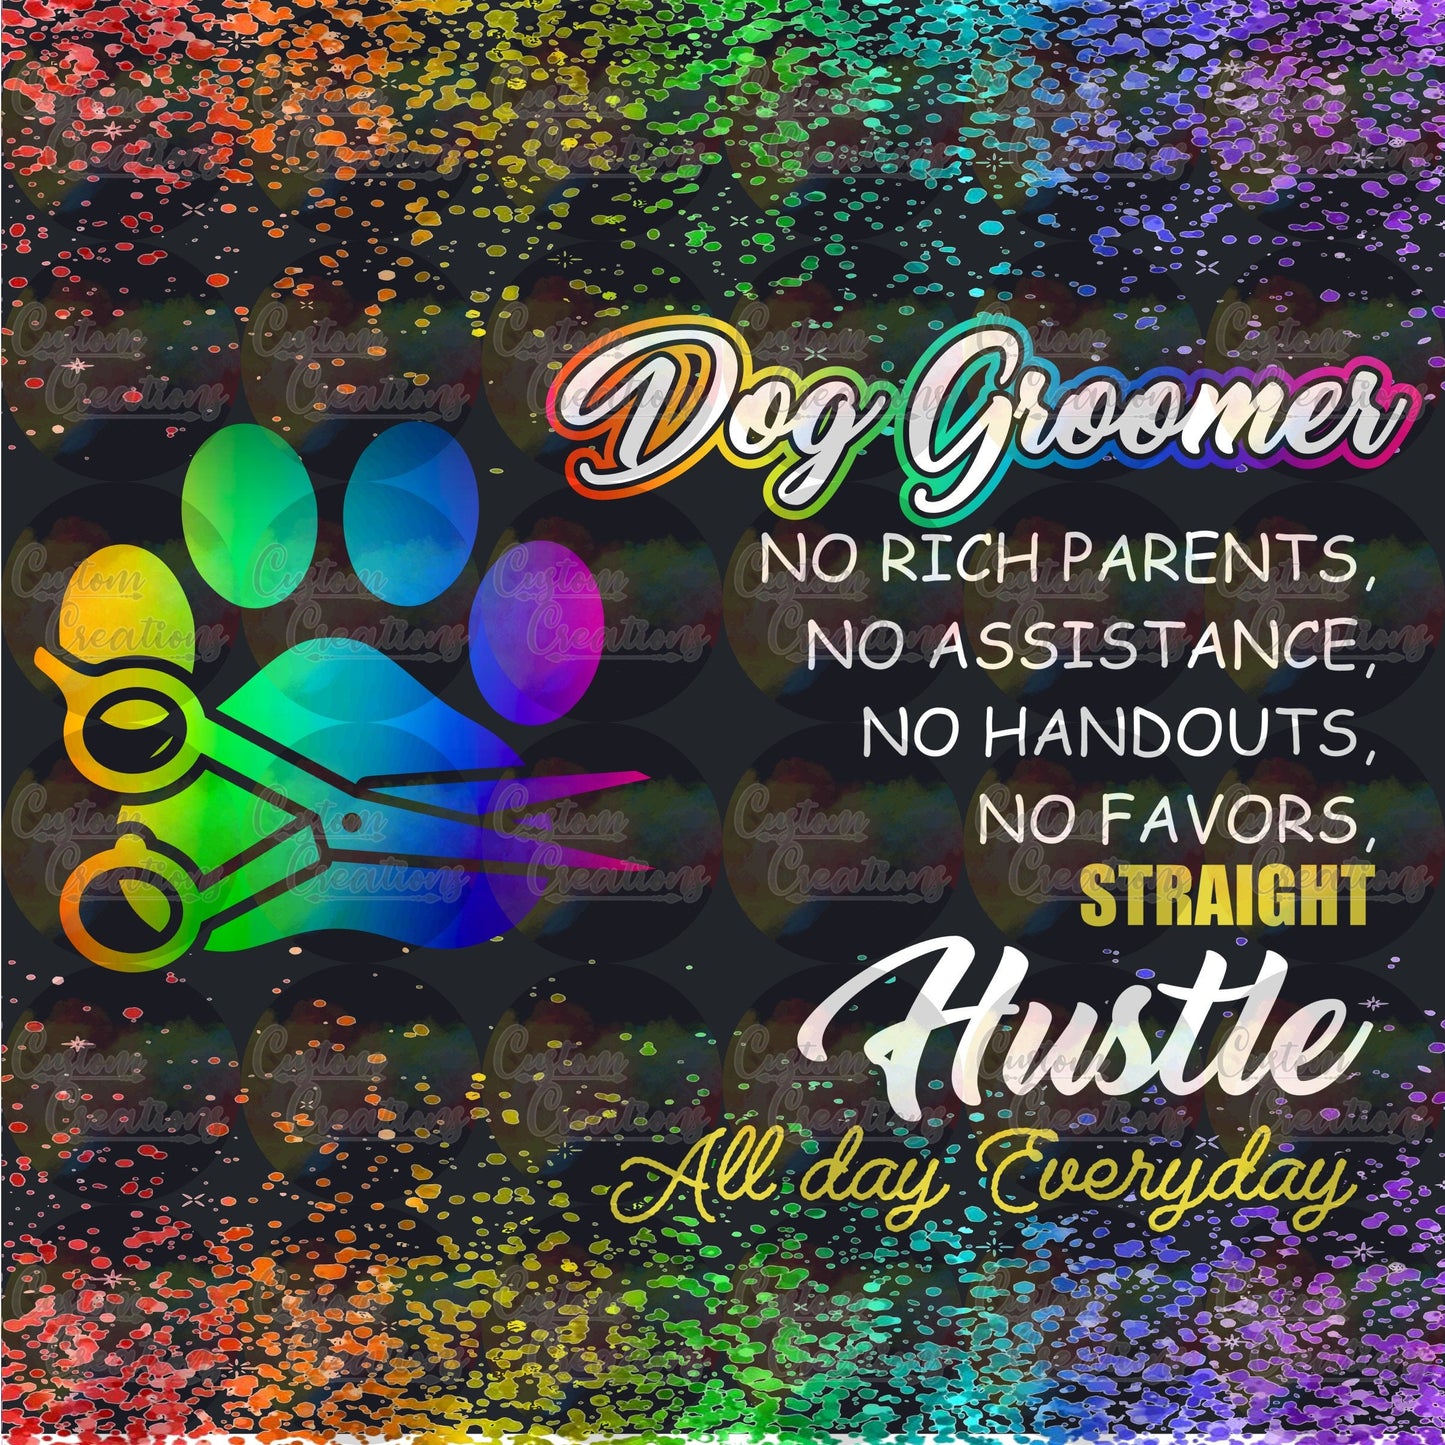 Dog Groomer No Rich Parents, No Assistance, No Handouts, No Favors, Straight Hustle All Day Everyday Digital File Download PNG & JPEG